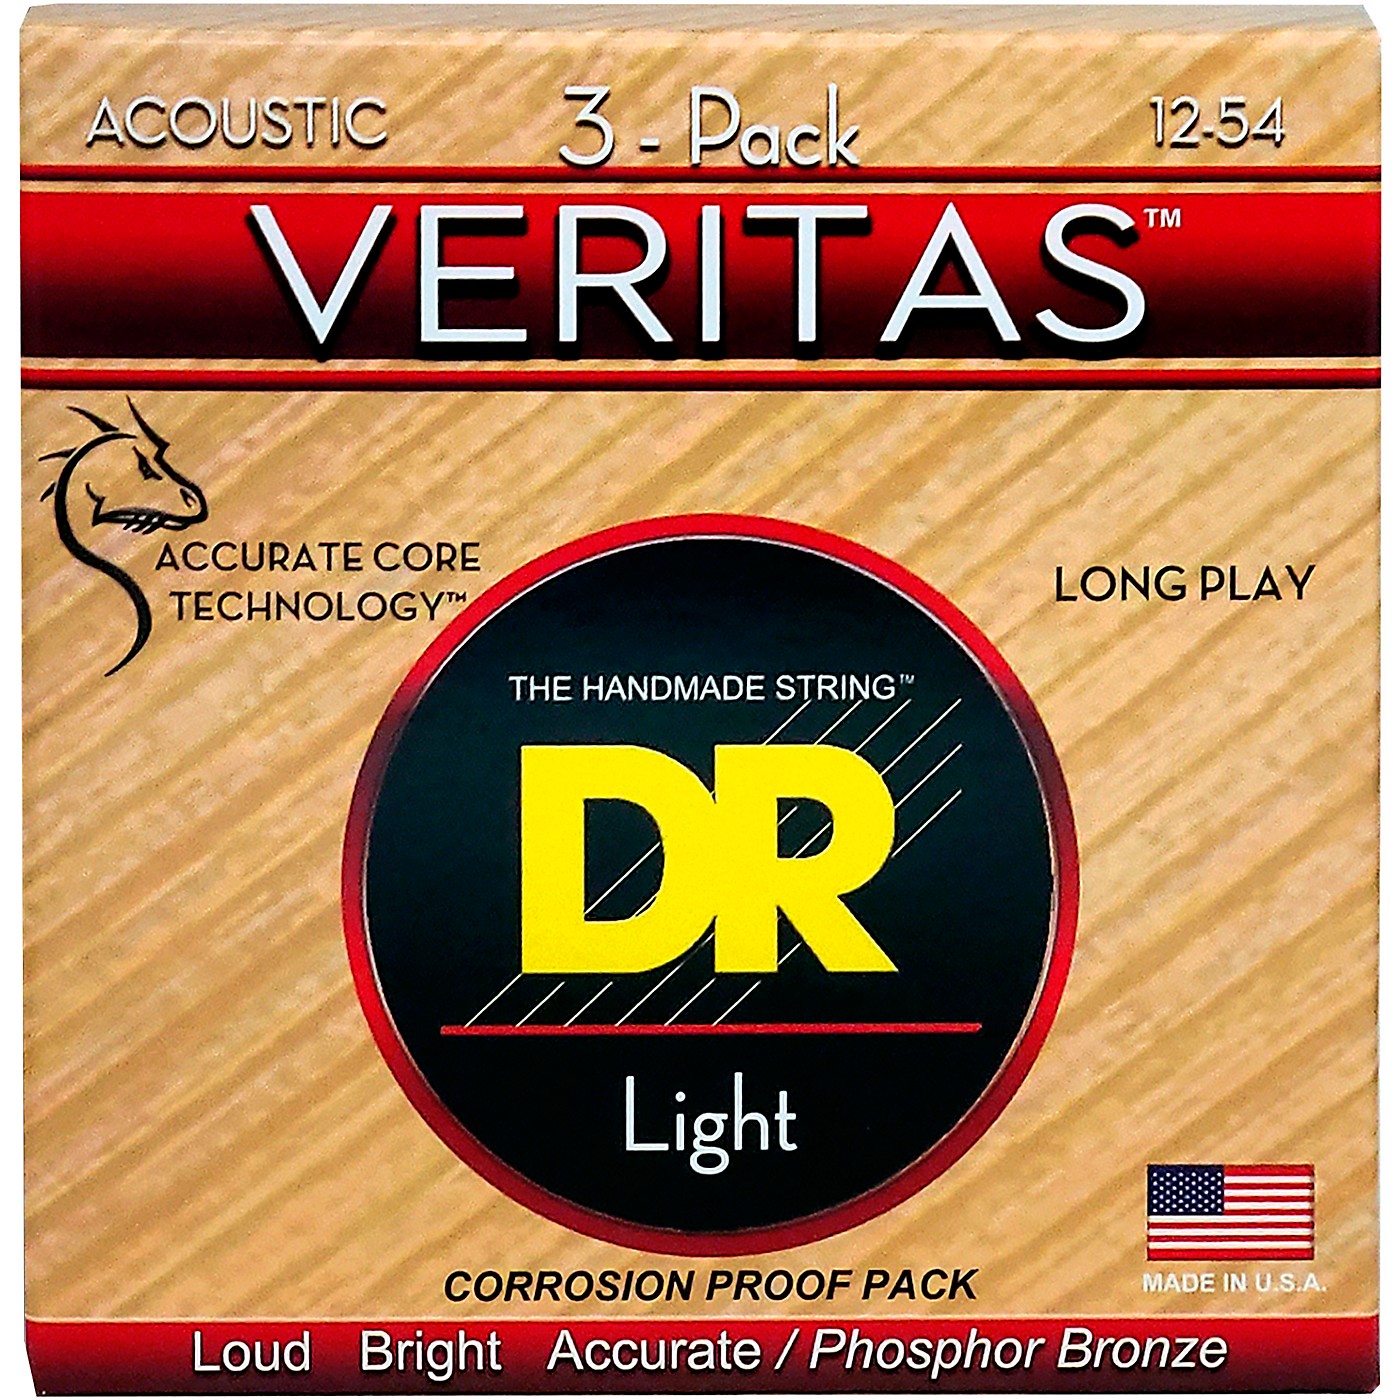 DR Strings Veritas - Perfect Pitch with Dragon Core Technology Light Acoustic Strings (12-54) 3-PACK thumbnail